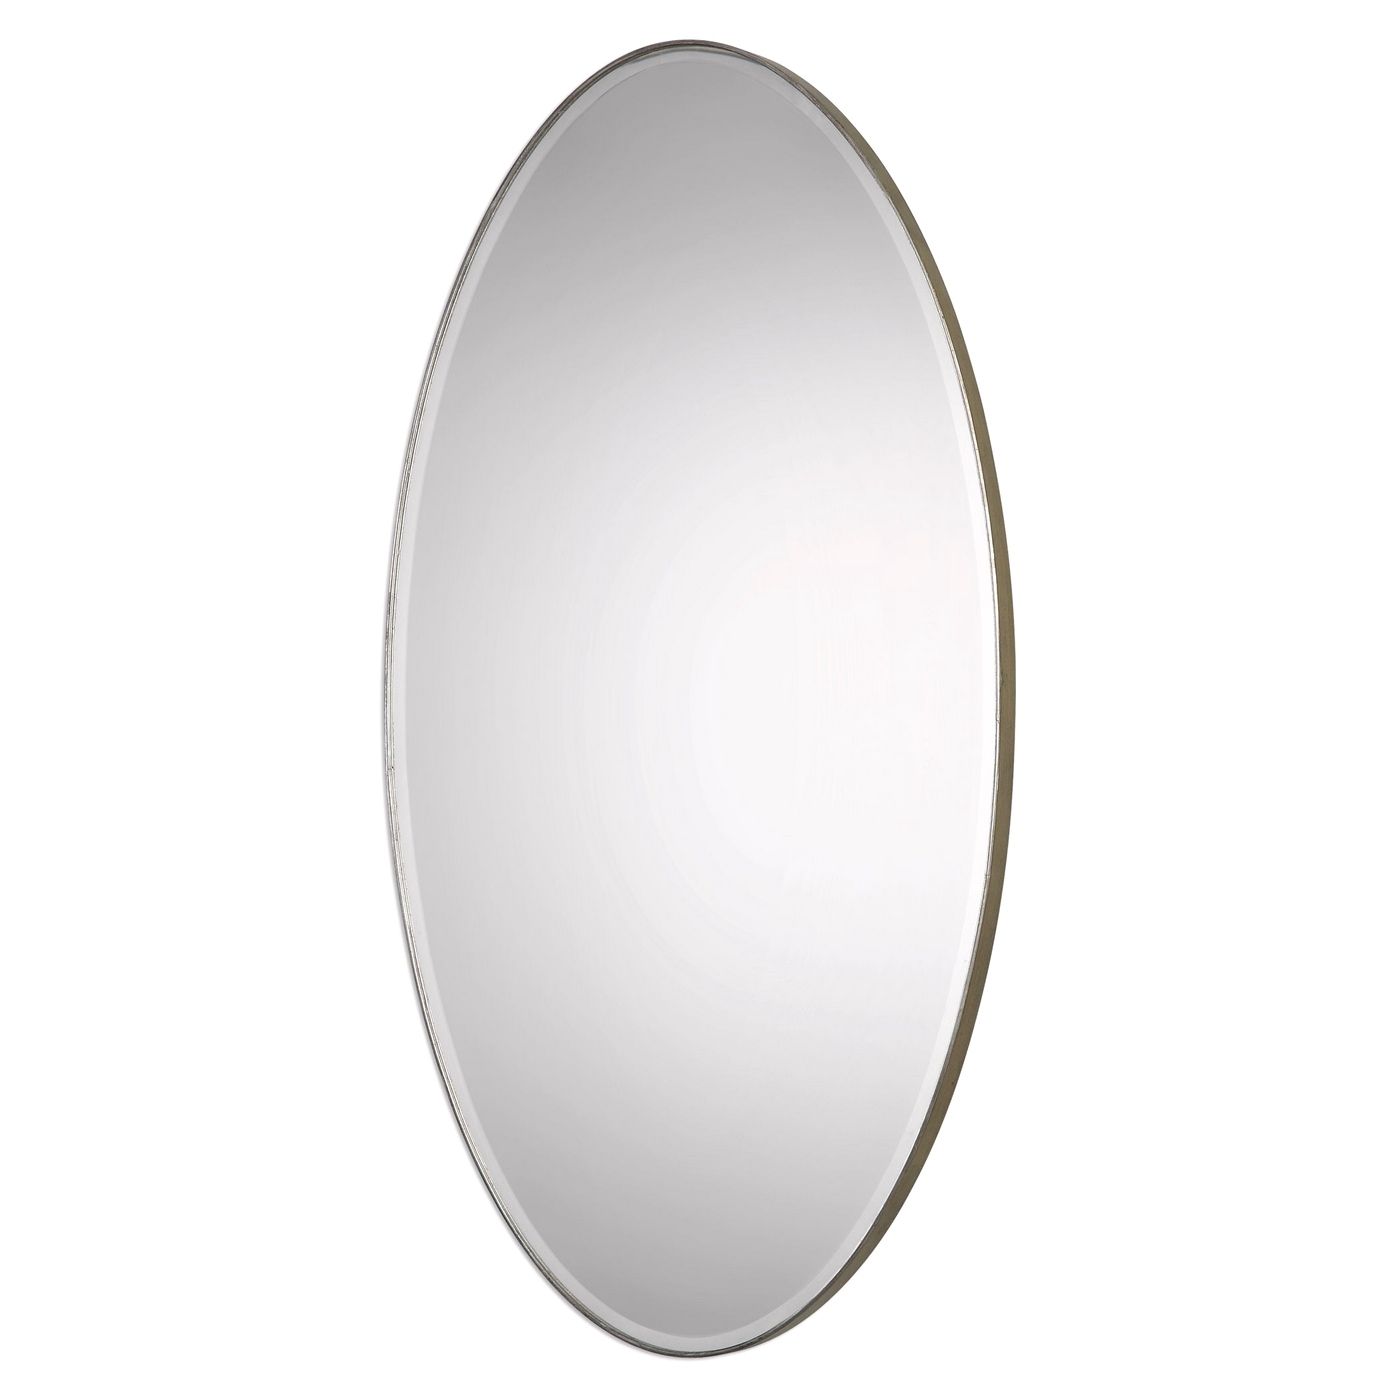 Chic Petra Large Oval Wall Mirror With Iron Frame In Silver Leaf Finish In Iron Frame Handcrafted Wall Mirrors (View 14 of 15)